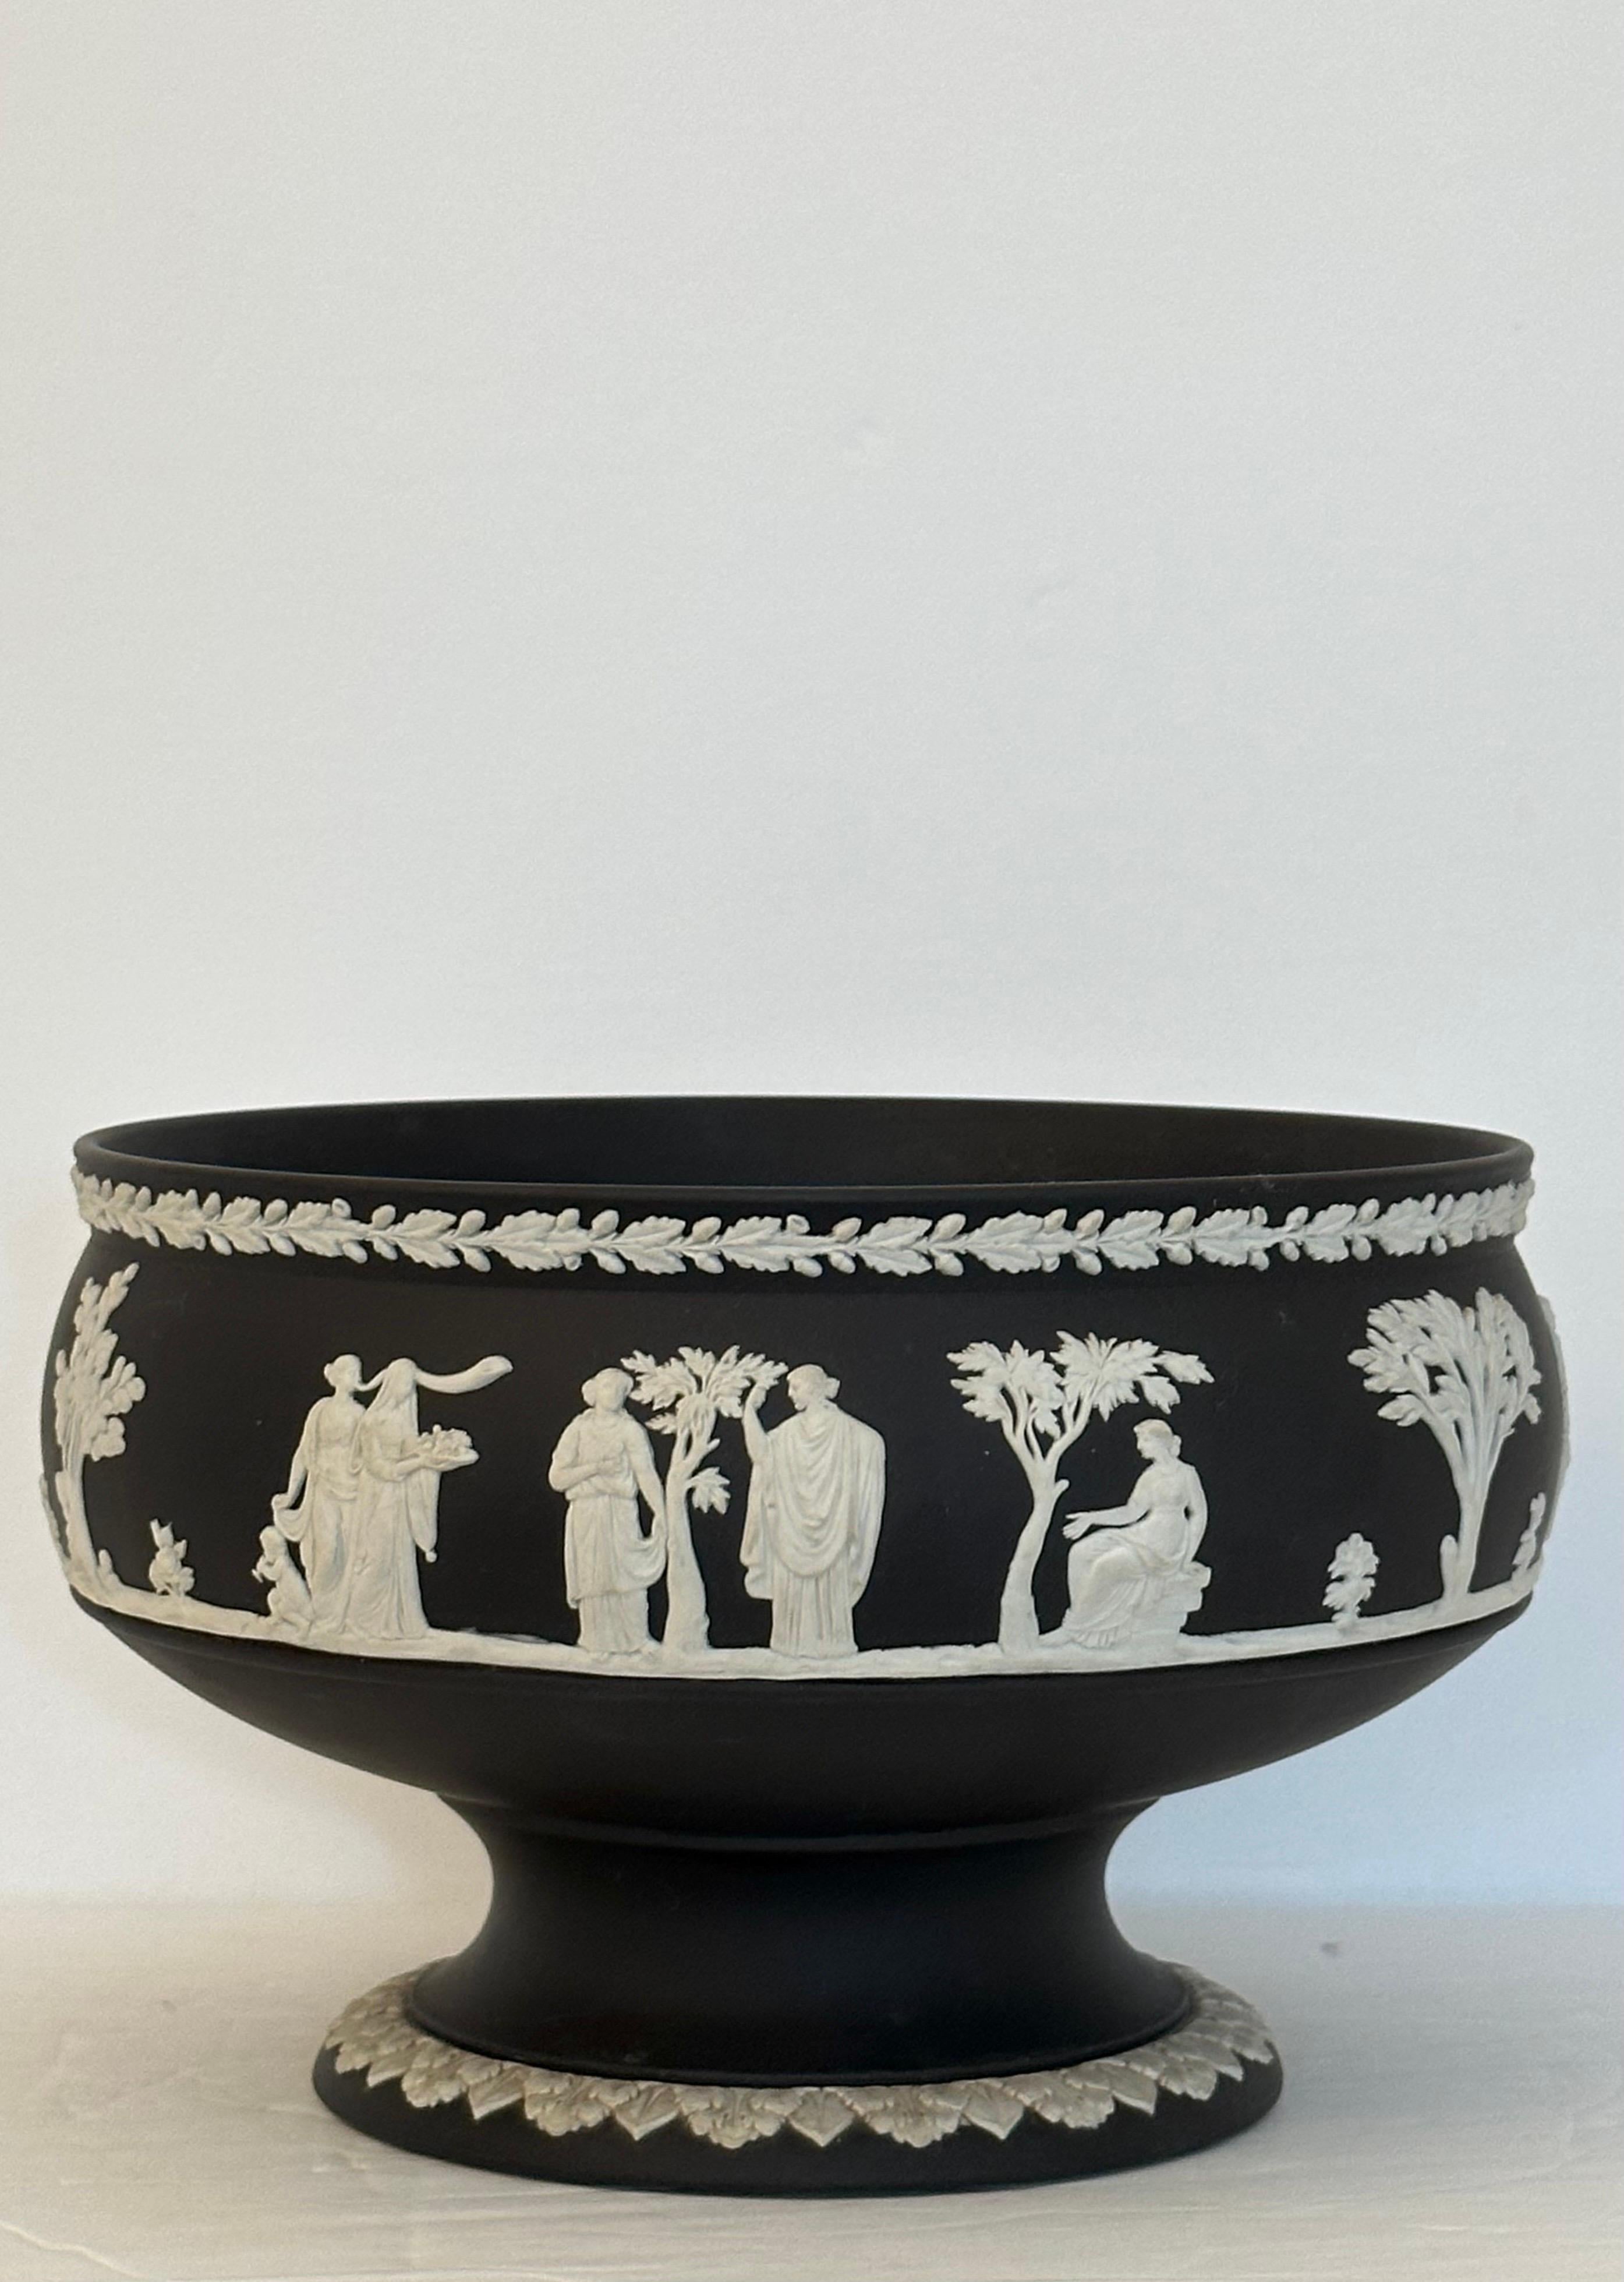 We are very pleased to offer a stunning footed bowl from Wedgwood, crafted in England, dating back to the 1960s.  Wedgwood stands as a pillar in the British ceramics industry, having influenced styles and preferences for over 260 years.  The company